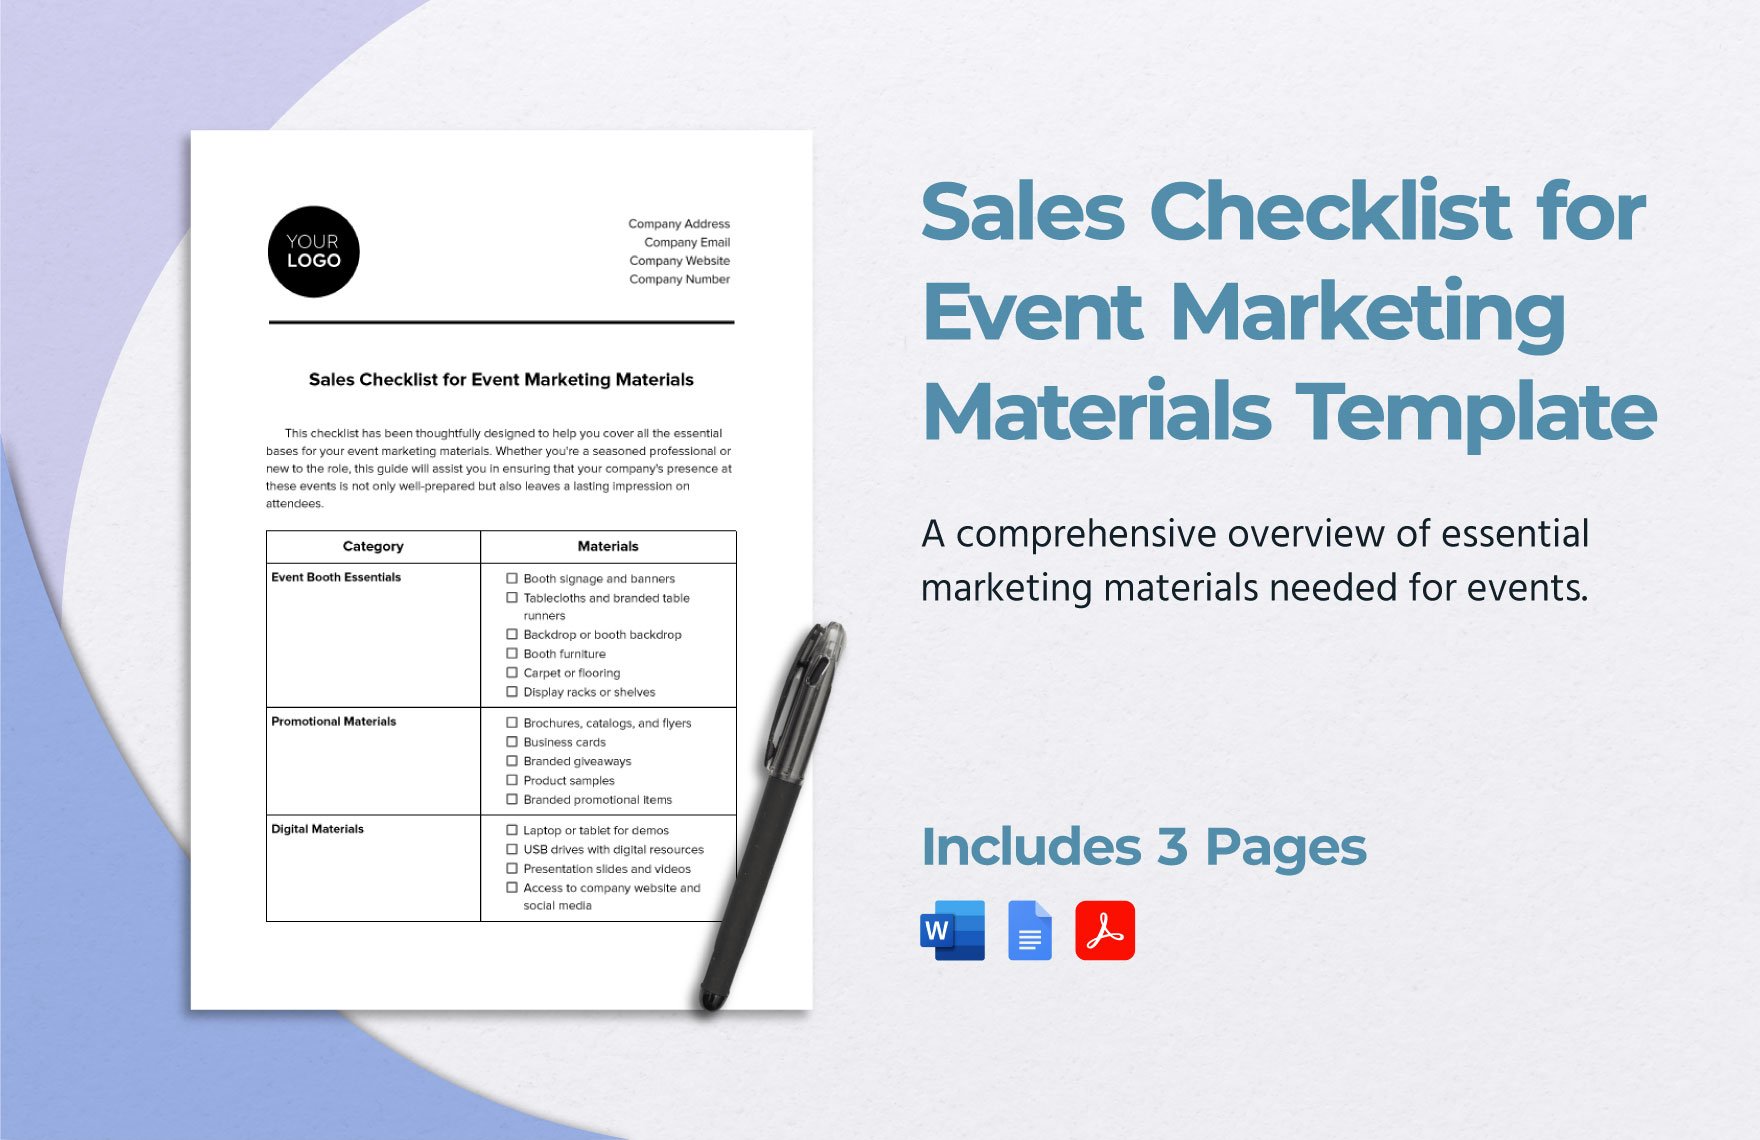 Sales Checklist for Event Marketing Materials Template in Word, Google Docs, PDF